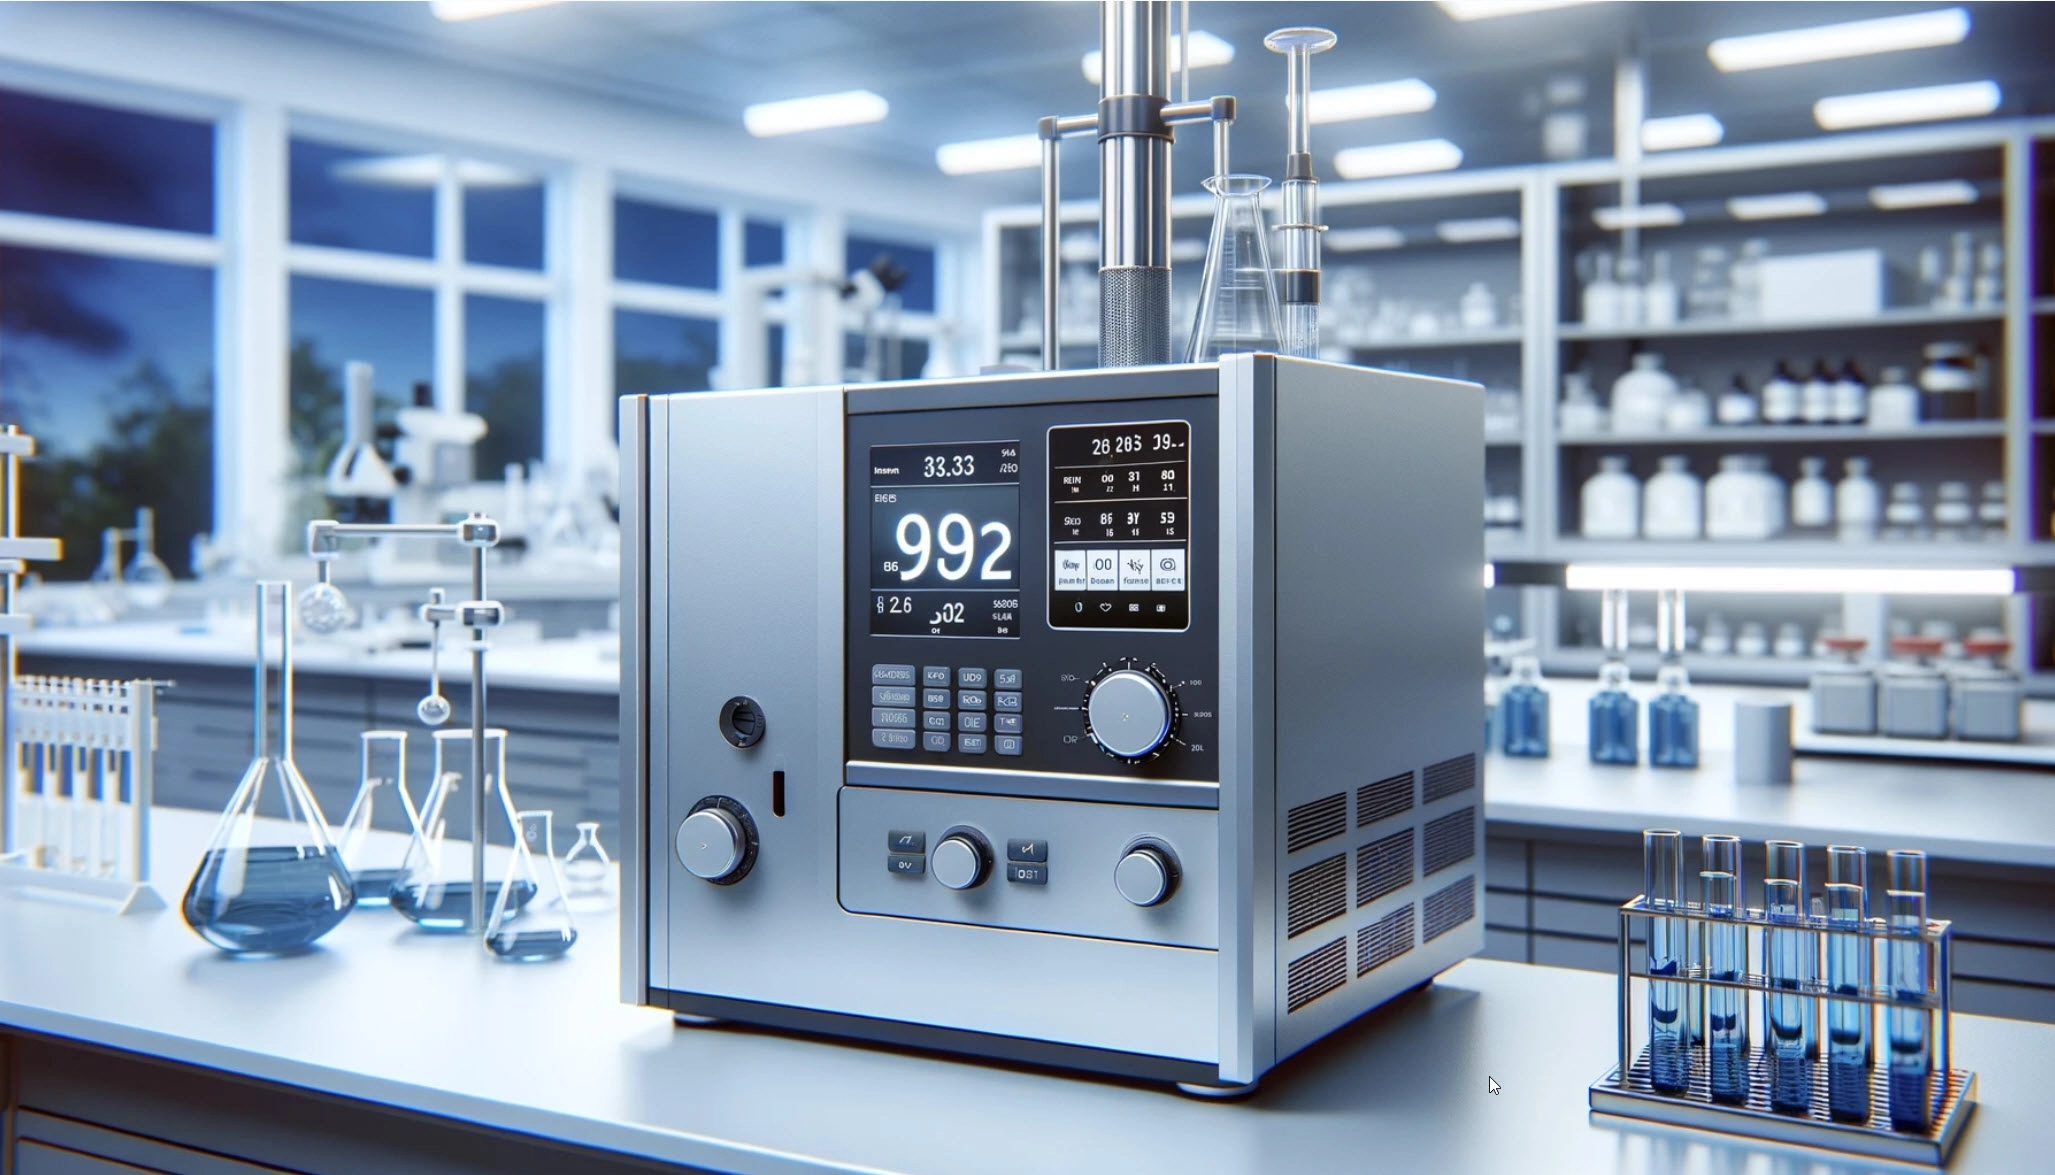 Image of a calorimeter instrument in a modern lab environment